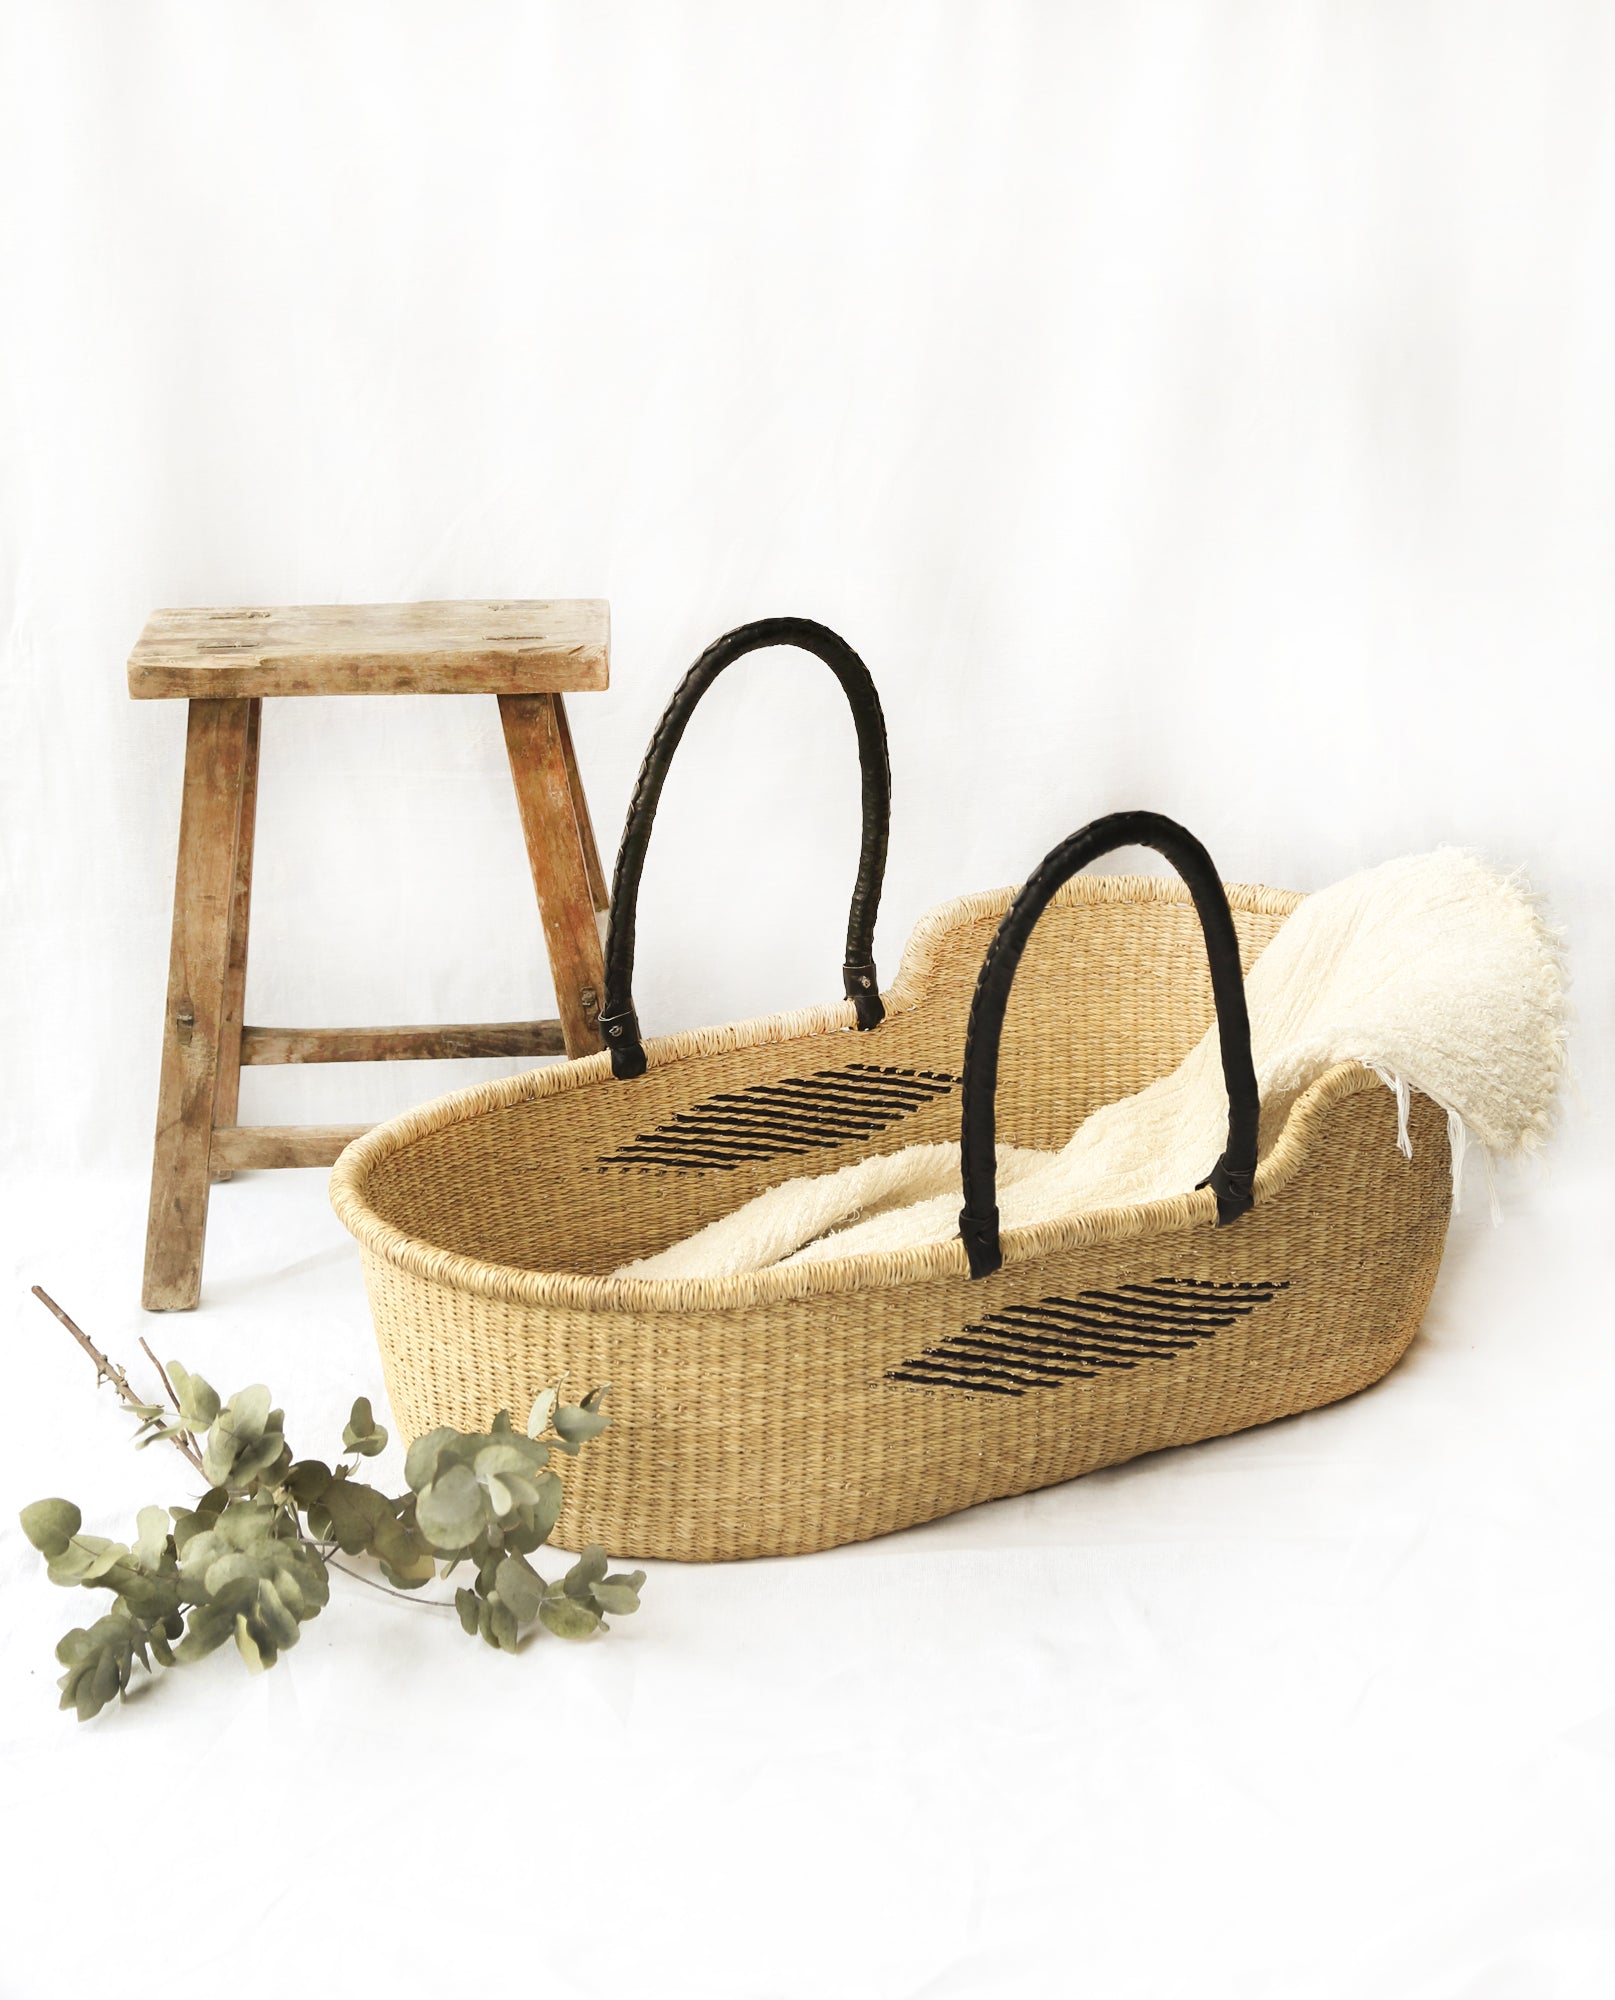 MALIKAH Handwoven Moses Basket With Leather Handles